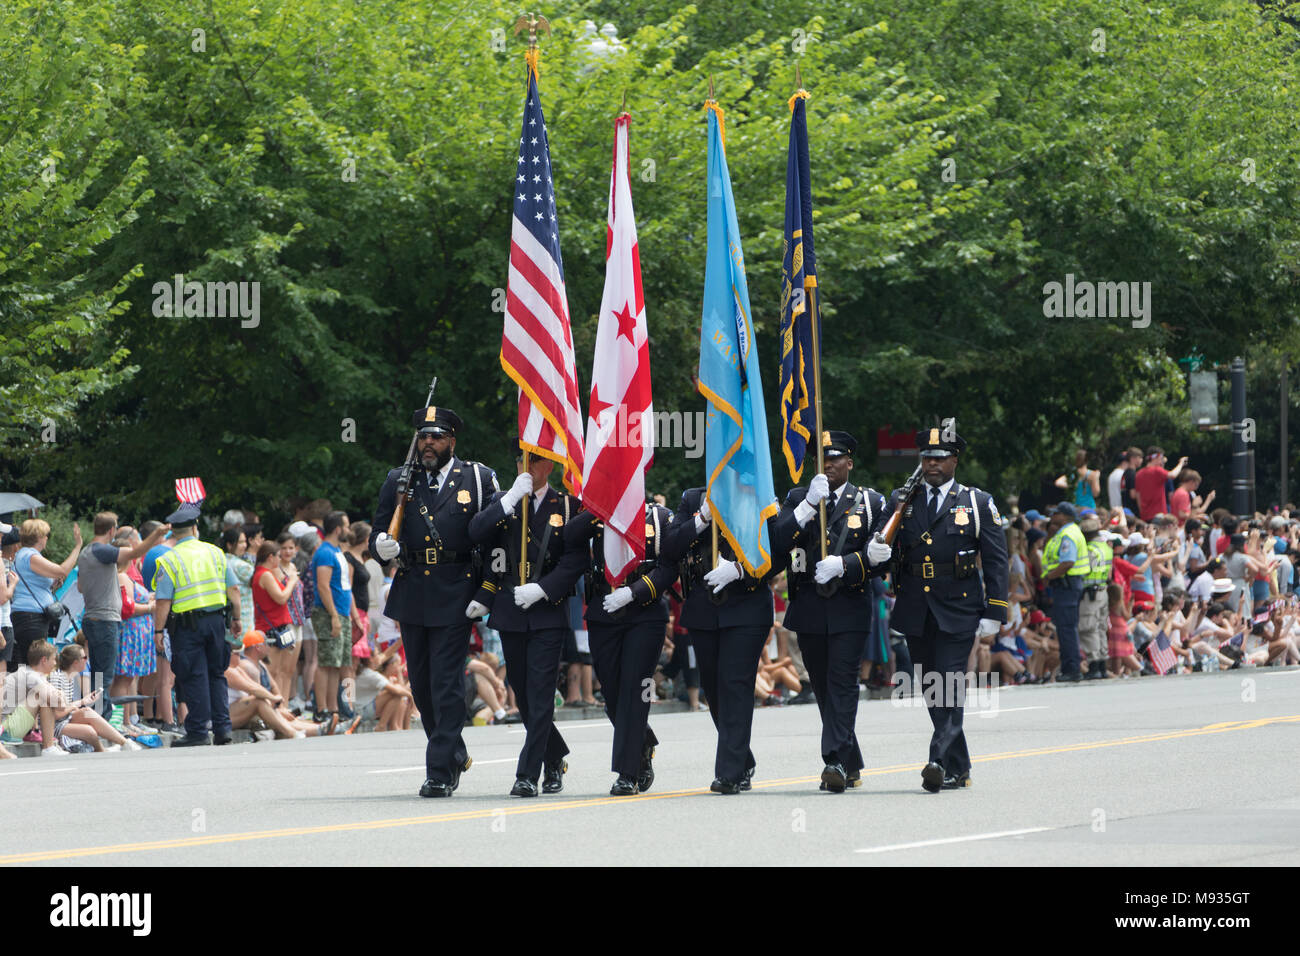 Washington, D.C., USA - July 4, 2017, The National Independence Day Parade is the  Fourth of July Parade in the capital of the United States, it  comm Stock Photo